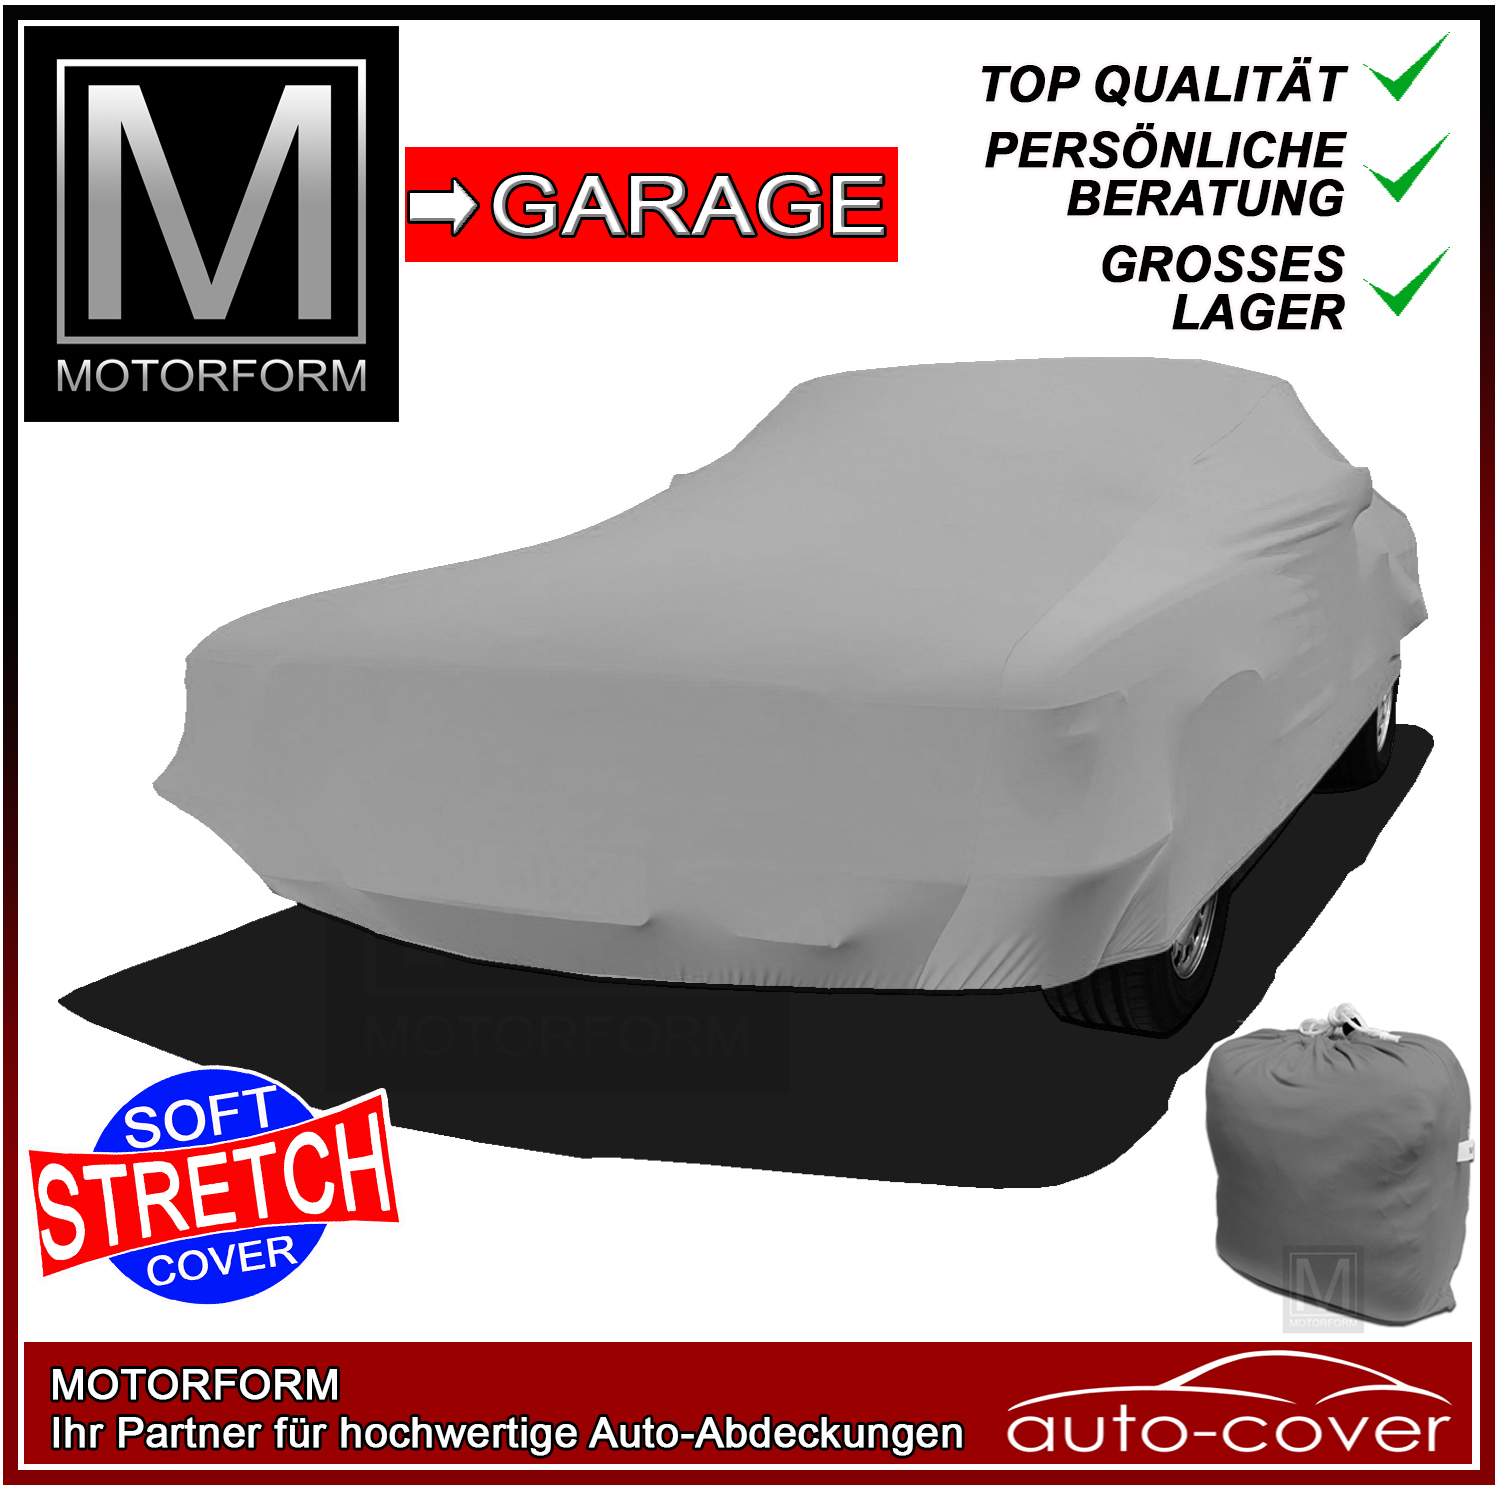 Grey Super Stretchy Cover for Mercedes SL-Class R129 (1989-2001)